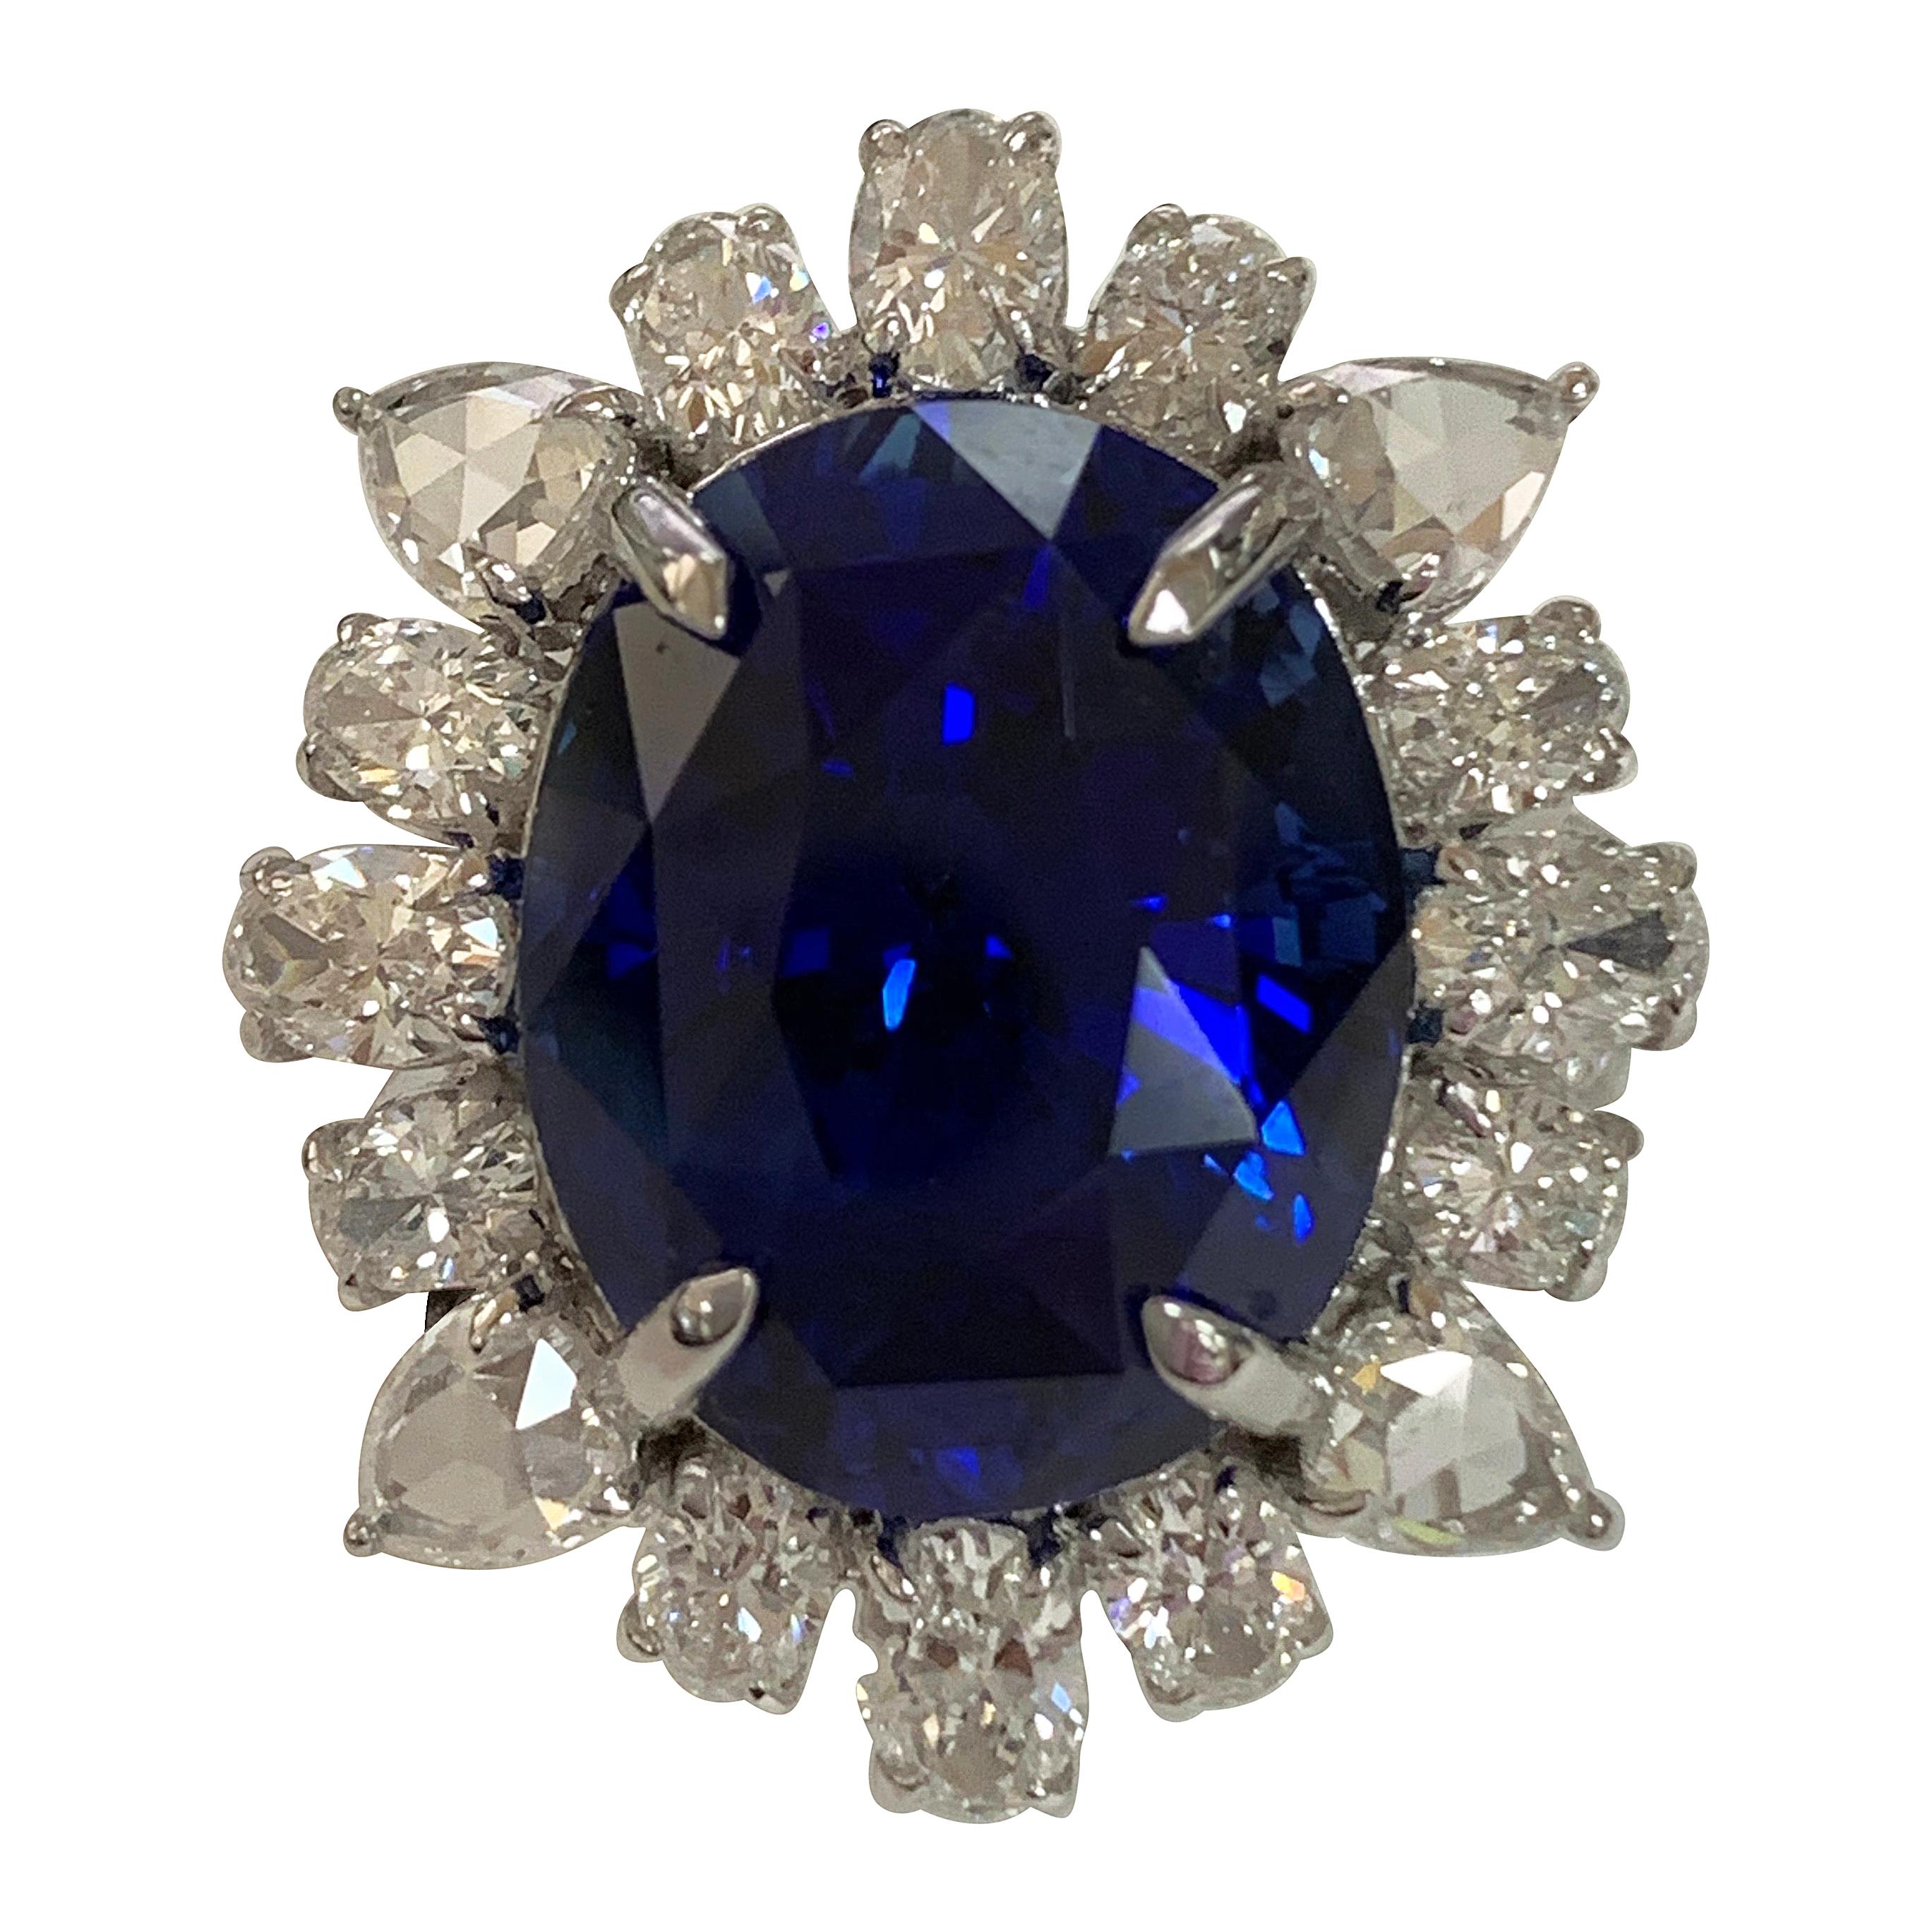 GIA Certified 20.08 Carat Blue Sapphire and Diamonds Ring